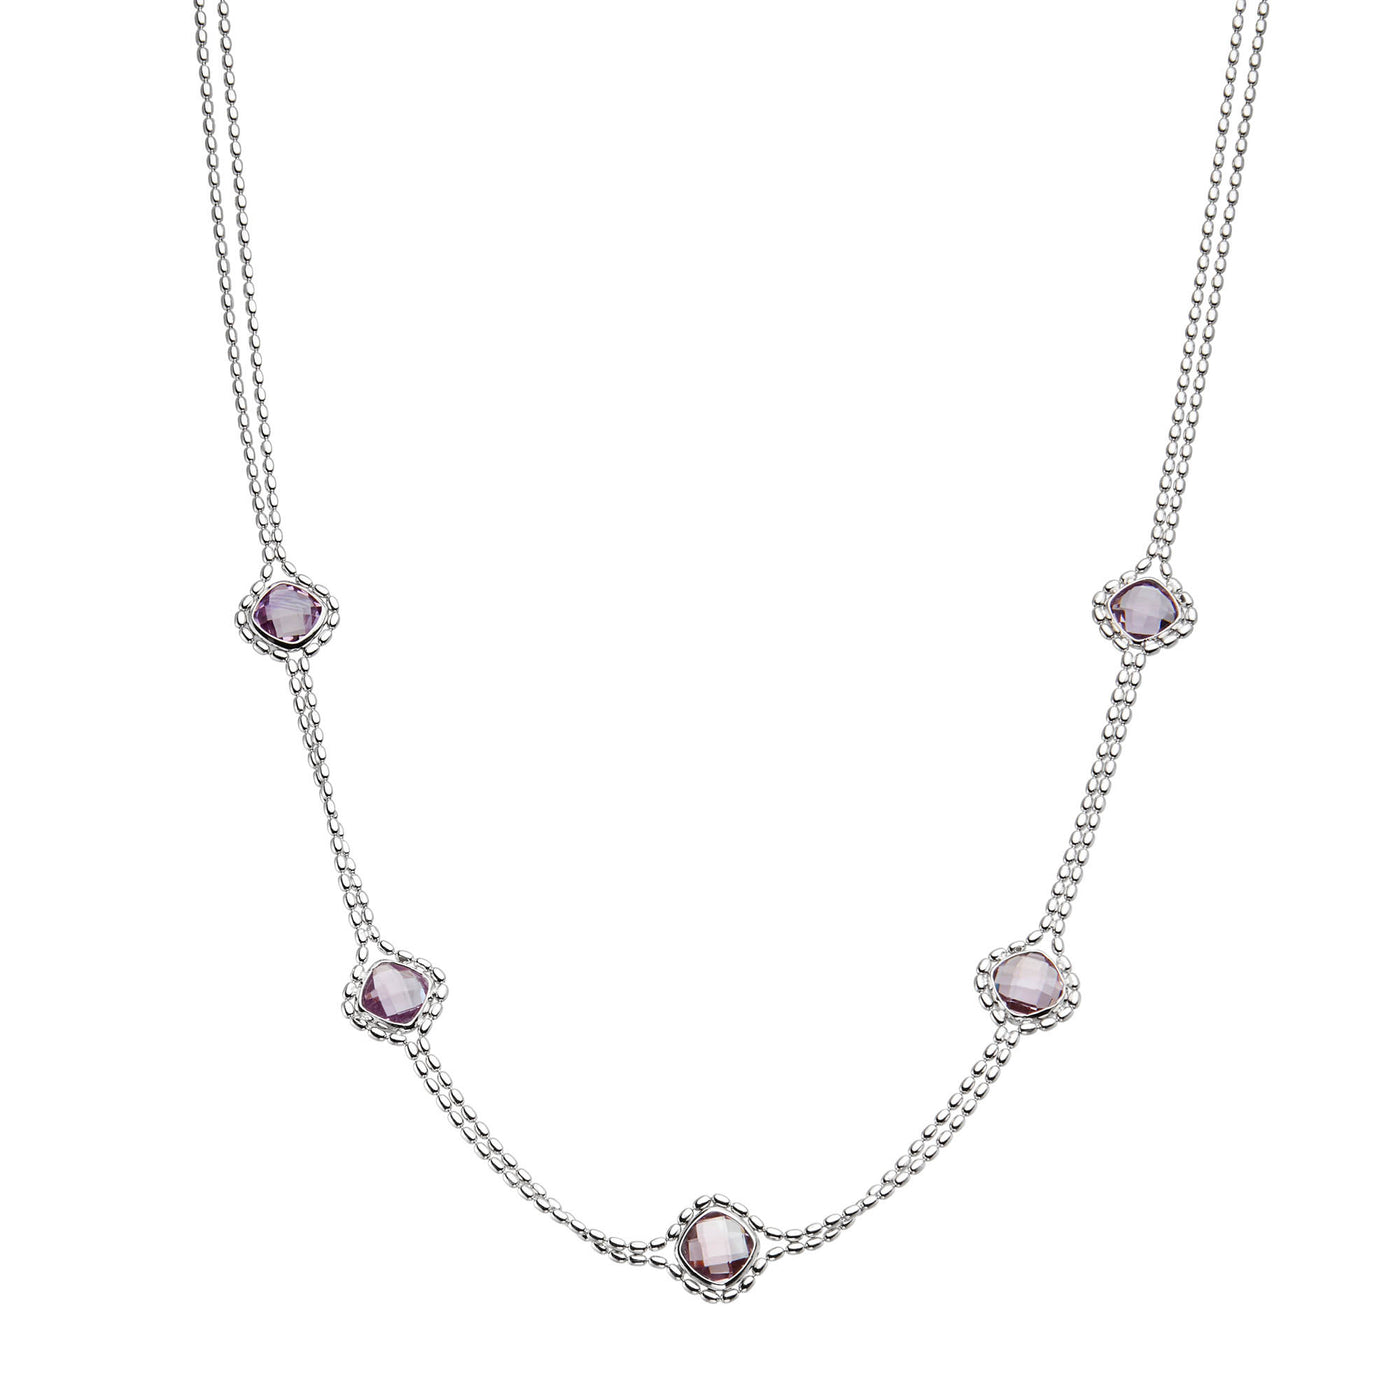 Rebecca Sloane Silver Beads Necklace With Amethyst Square Stones